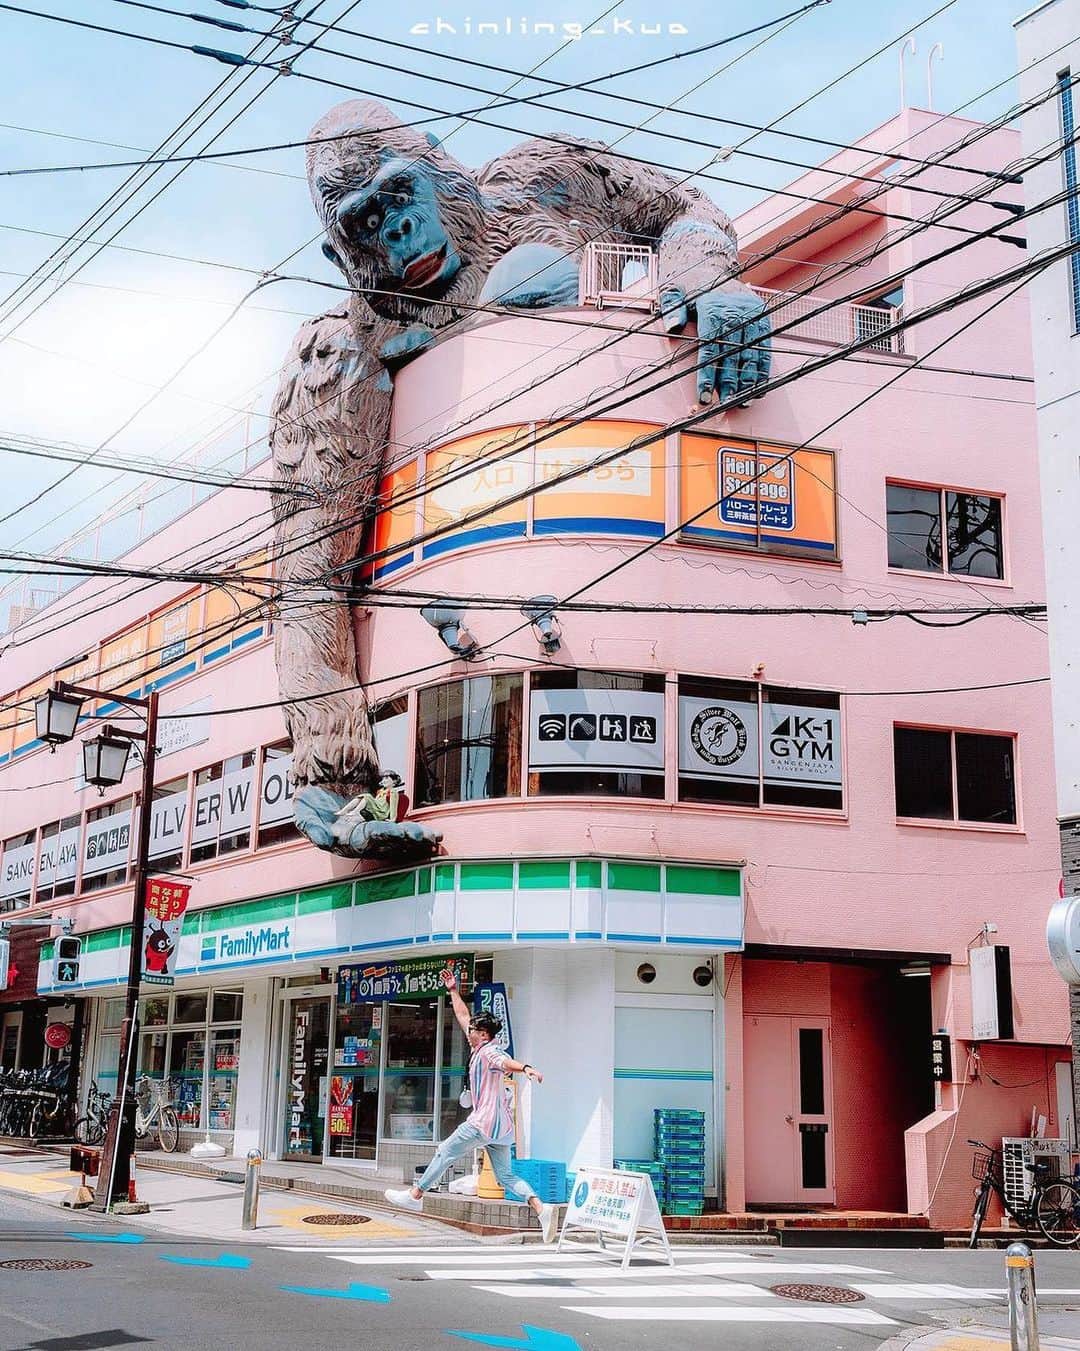 Promoting Tokyo Culture都庁文化振興部のインスタグラム：「Leaning over the roof of a building is... a giant gorilla! 🦍 This can't-miss sight is located in Taishido, Setagaya-ku. It was built in 1979 to become a landmark of the Taishido shopping street and is still a familiar landmark in the area even today.  -  建物の屋上から身を乗り出しているのは...巨大なゴリラ！🦍 思わず目を見張るようなこちらは、世田谷区・太子堂にある「ゴリラビル」。 太子堂商店街の名物になるようにと昭和54年に建てられ、今も街のランドマークとして親しまれています。  #tokyoartsandculture 📸: @chinling_kuo  #setagaya #tokyoarchitecture #ゴリラビル  #tokyostreet #tokyophotography #tokyojapan  #tokyotokyo #culturetrip #explorejpn #japan_of_insta #japan_art_photography #japan_great_view #theculturetrip #japantrip #bestphoto_japan #thestreetphotographyhub  #nipponpic #japan_photo_now #tokyolife #discoverjapan #japanfocus #japanesestyle #unknownjapan #streetclassics #timeless_streets  #streetsnap #artphoto #publicart #publicartwork」